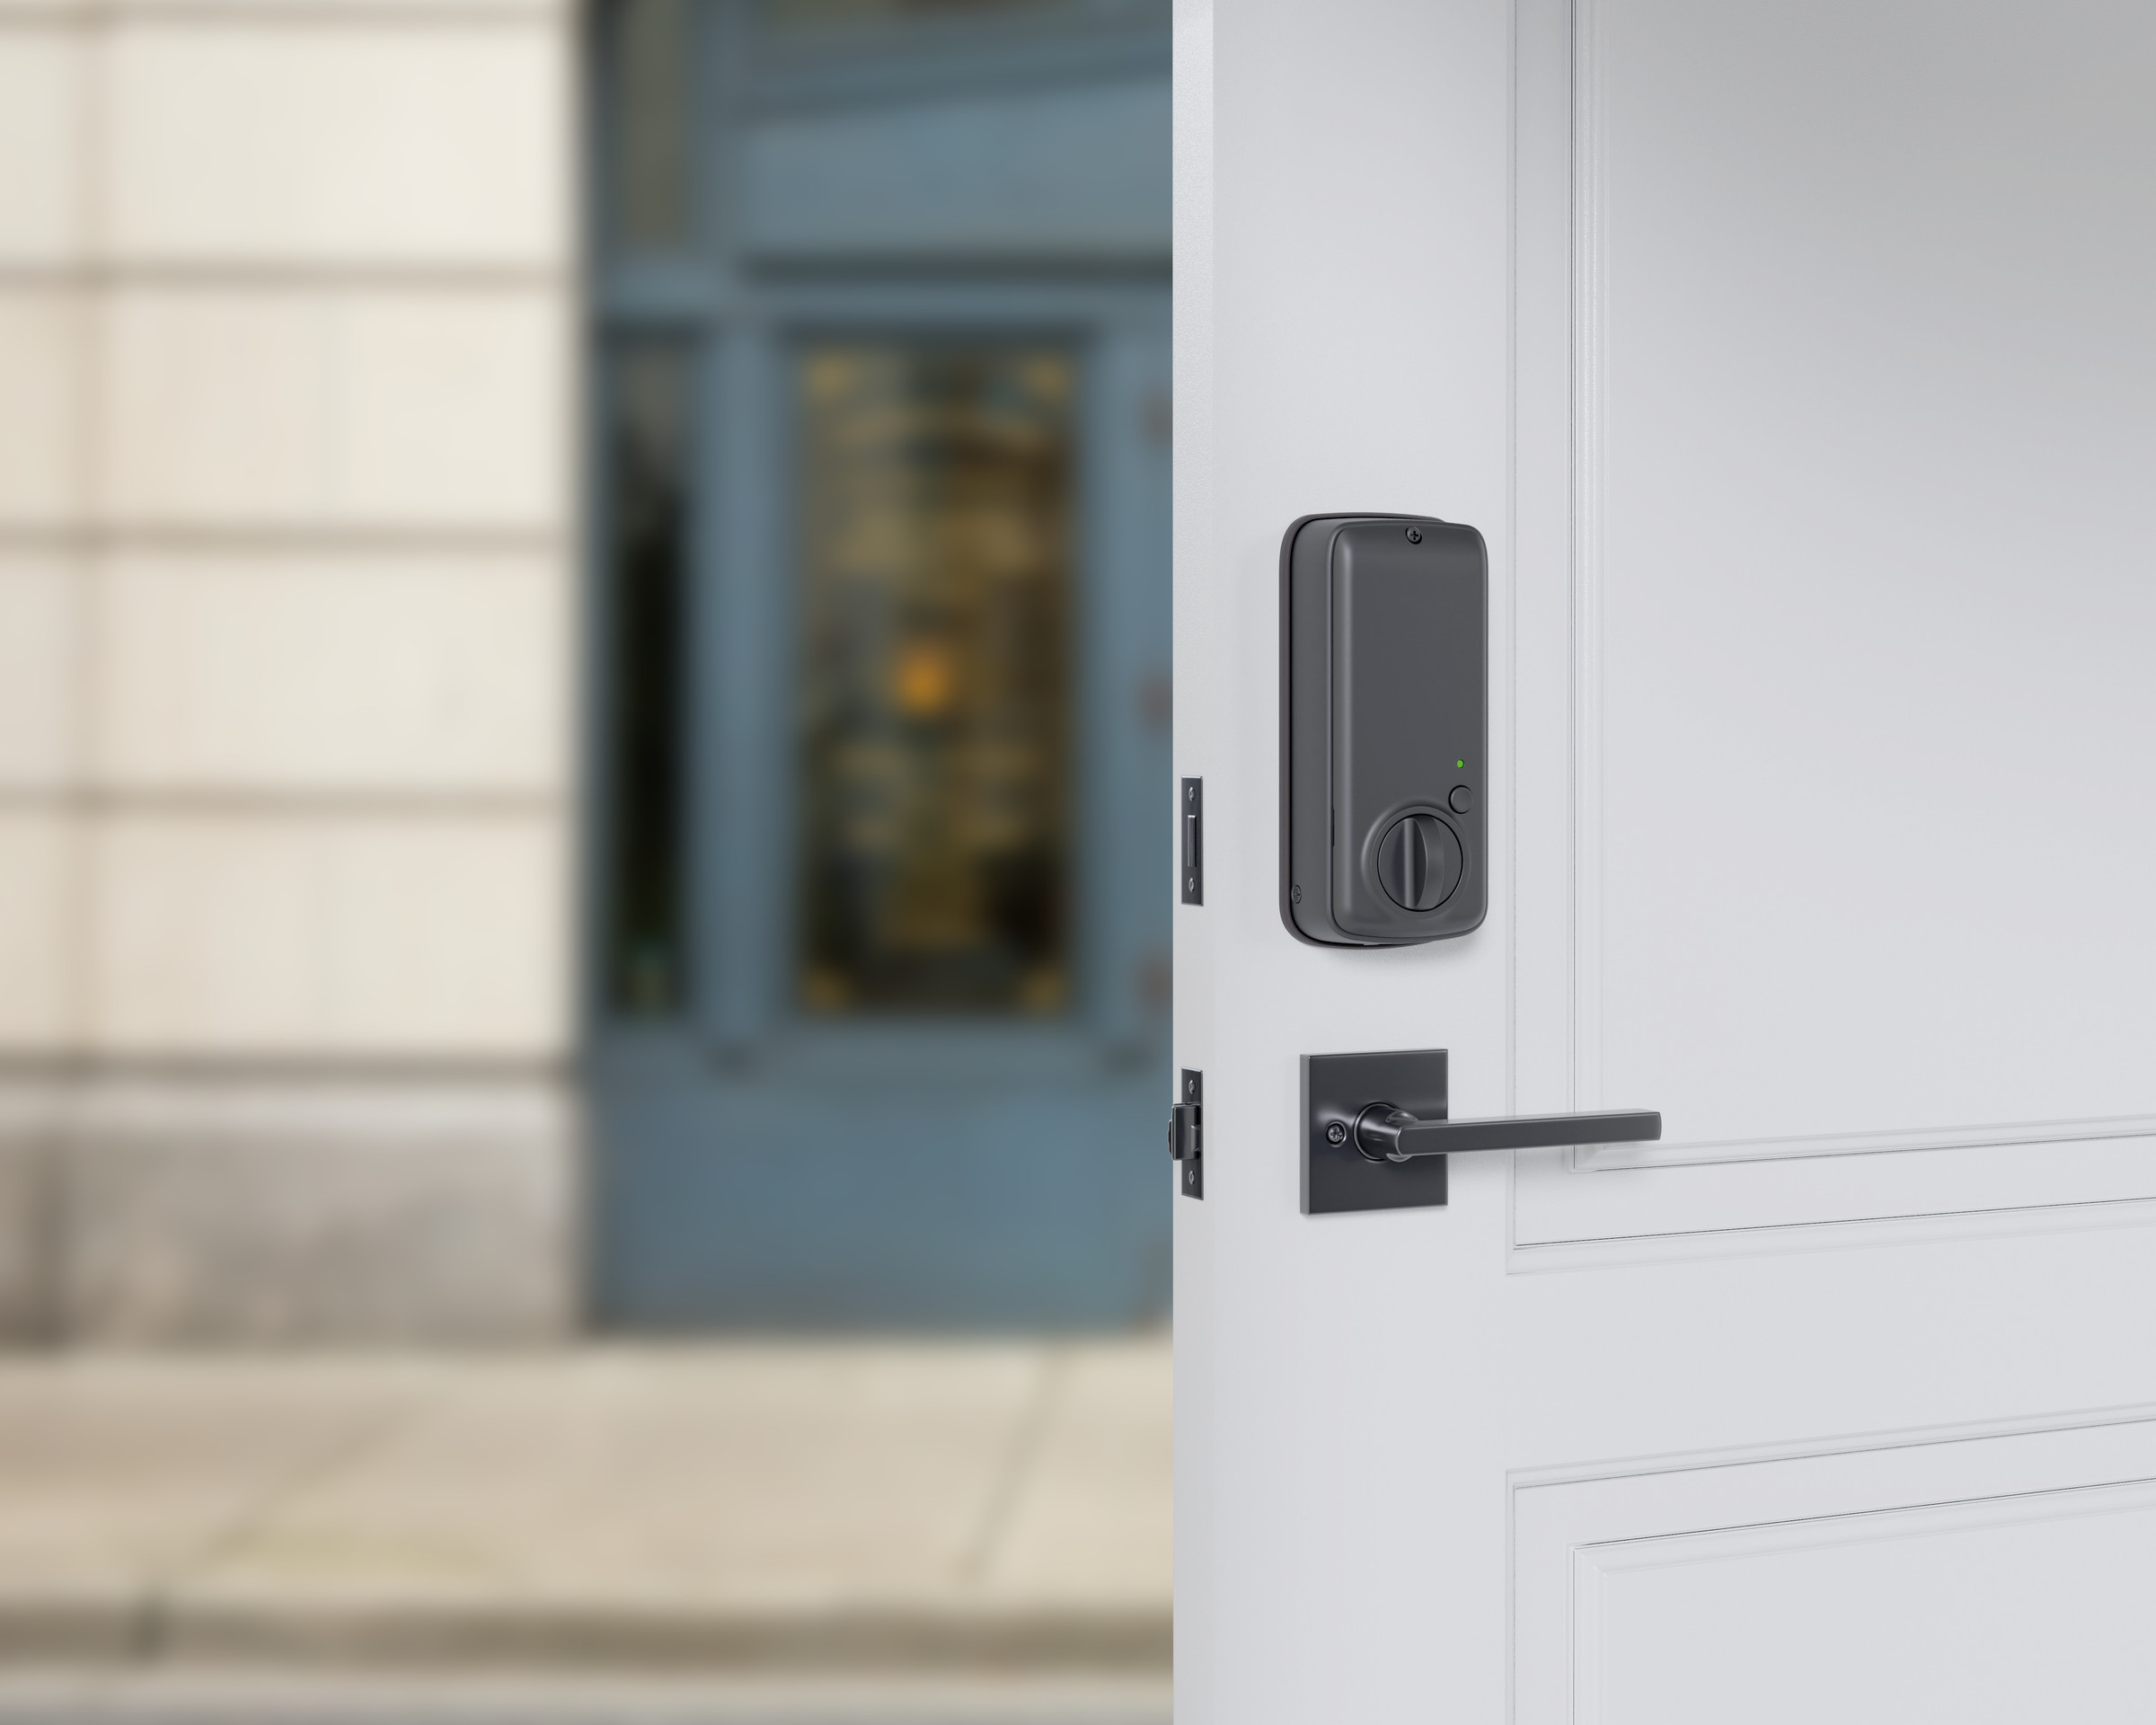 The interior portion of a smart deadlock, in black, on a white door. A street scene is blurred in the background.